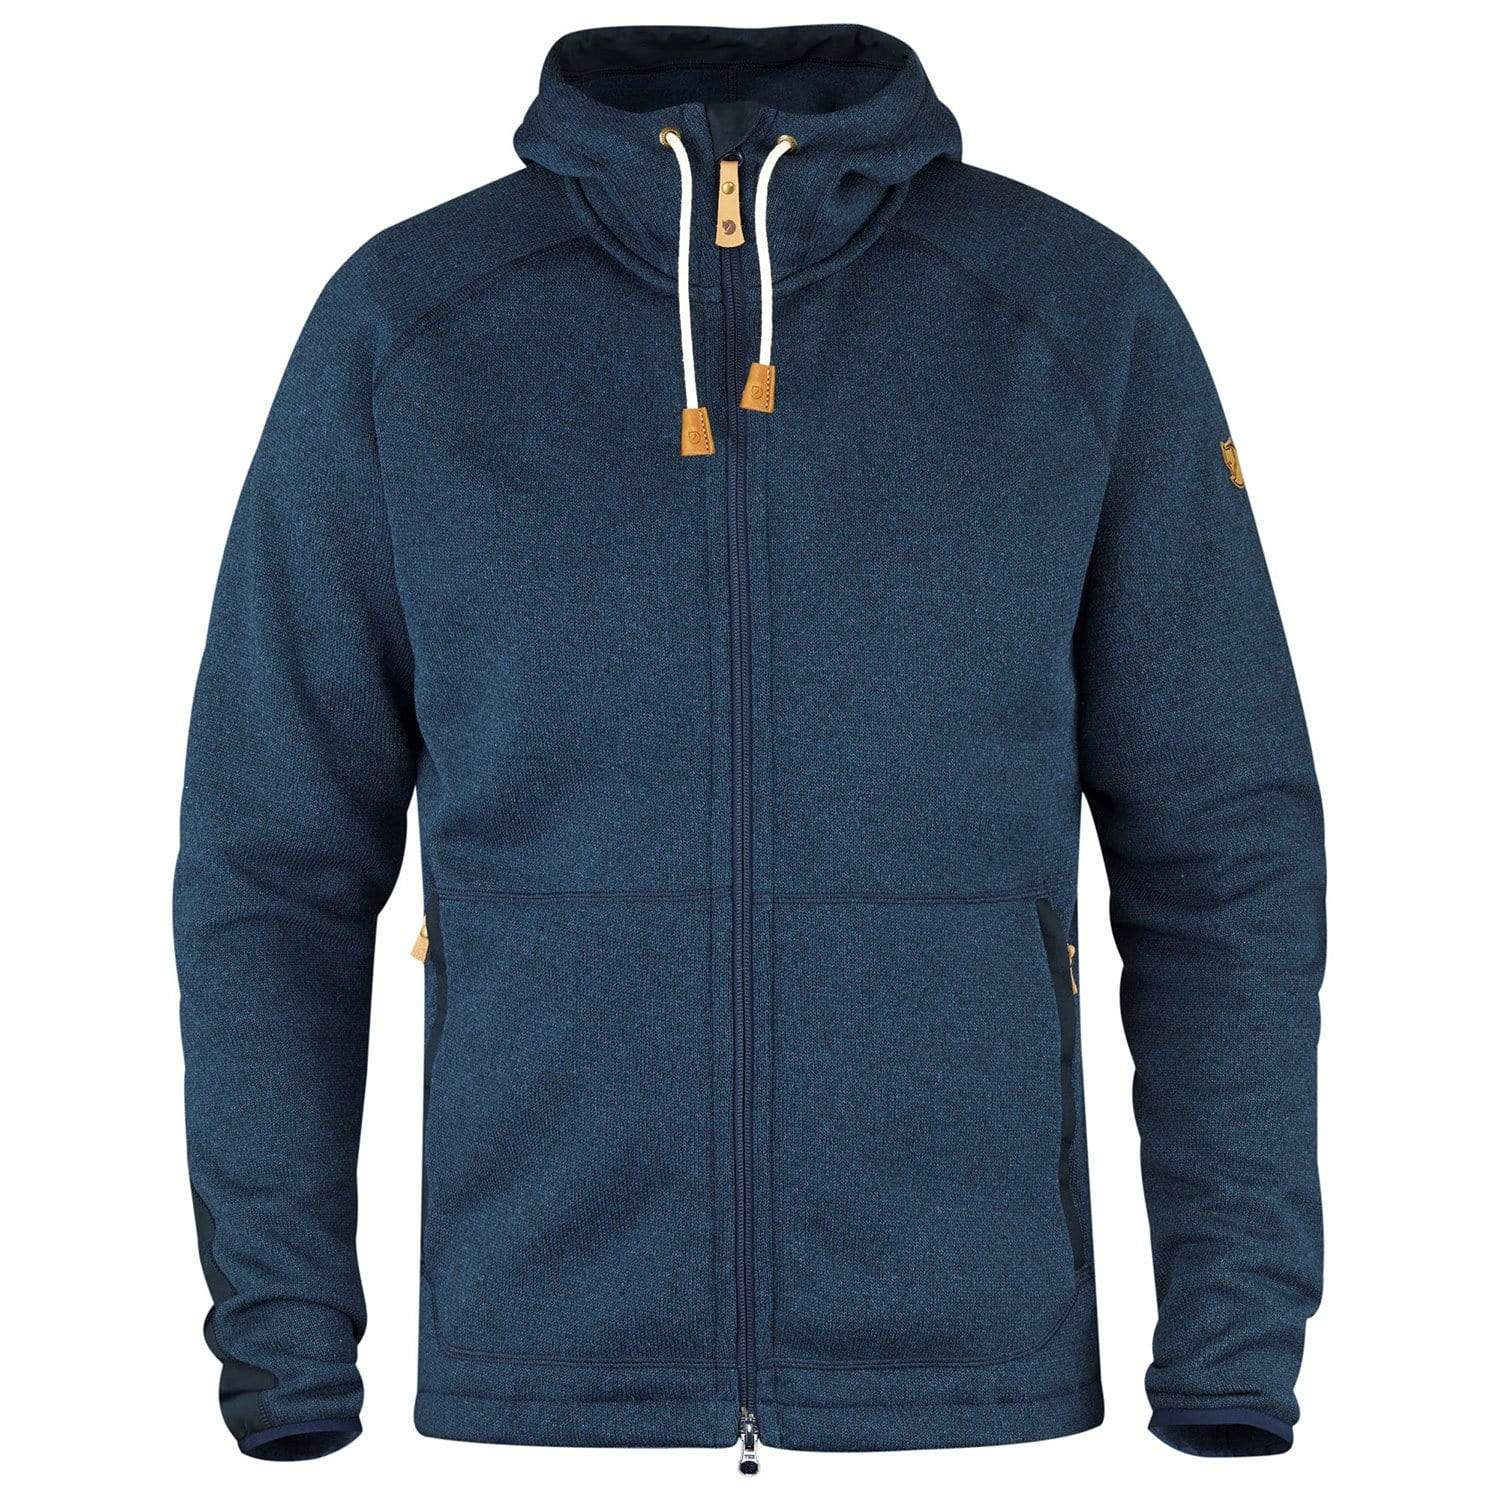 Read more about the article Fjallraven – Ovik Fleece Hoodie